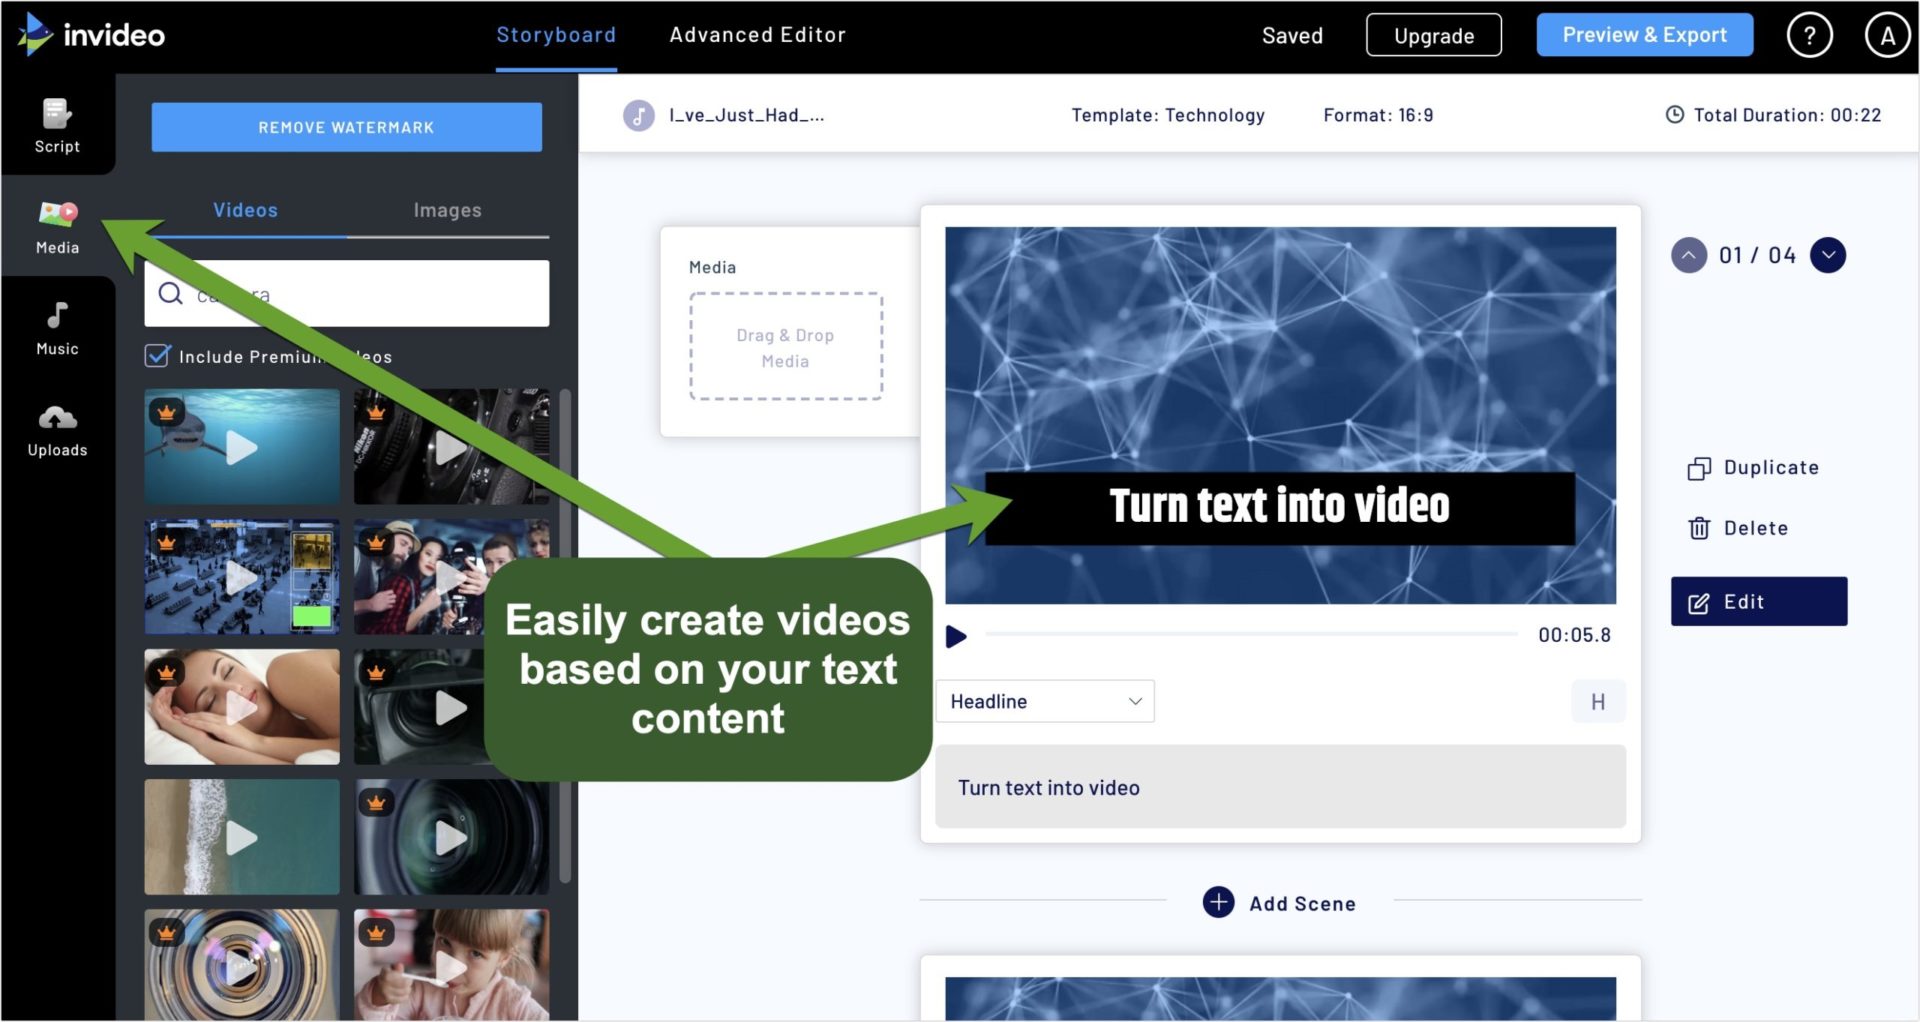 Screengrab of invideo to bring more traffic and conversions to your blog